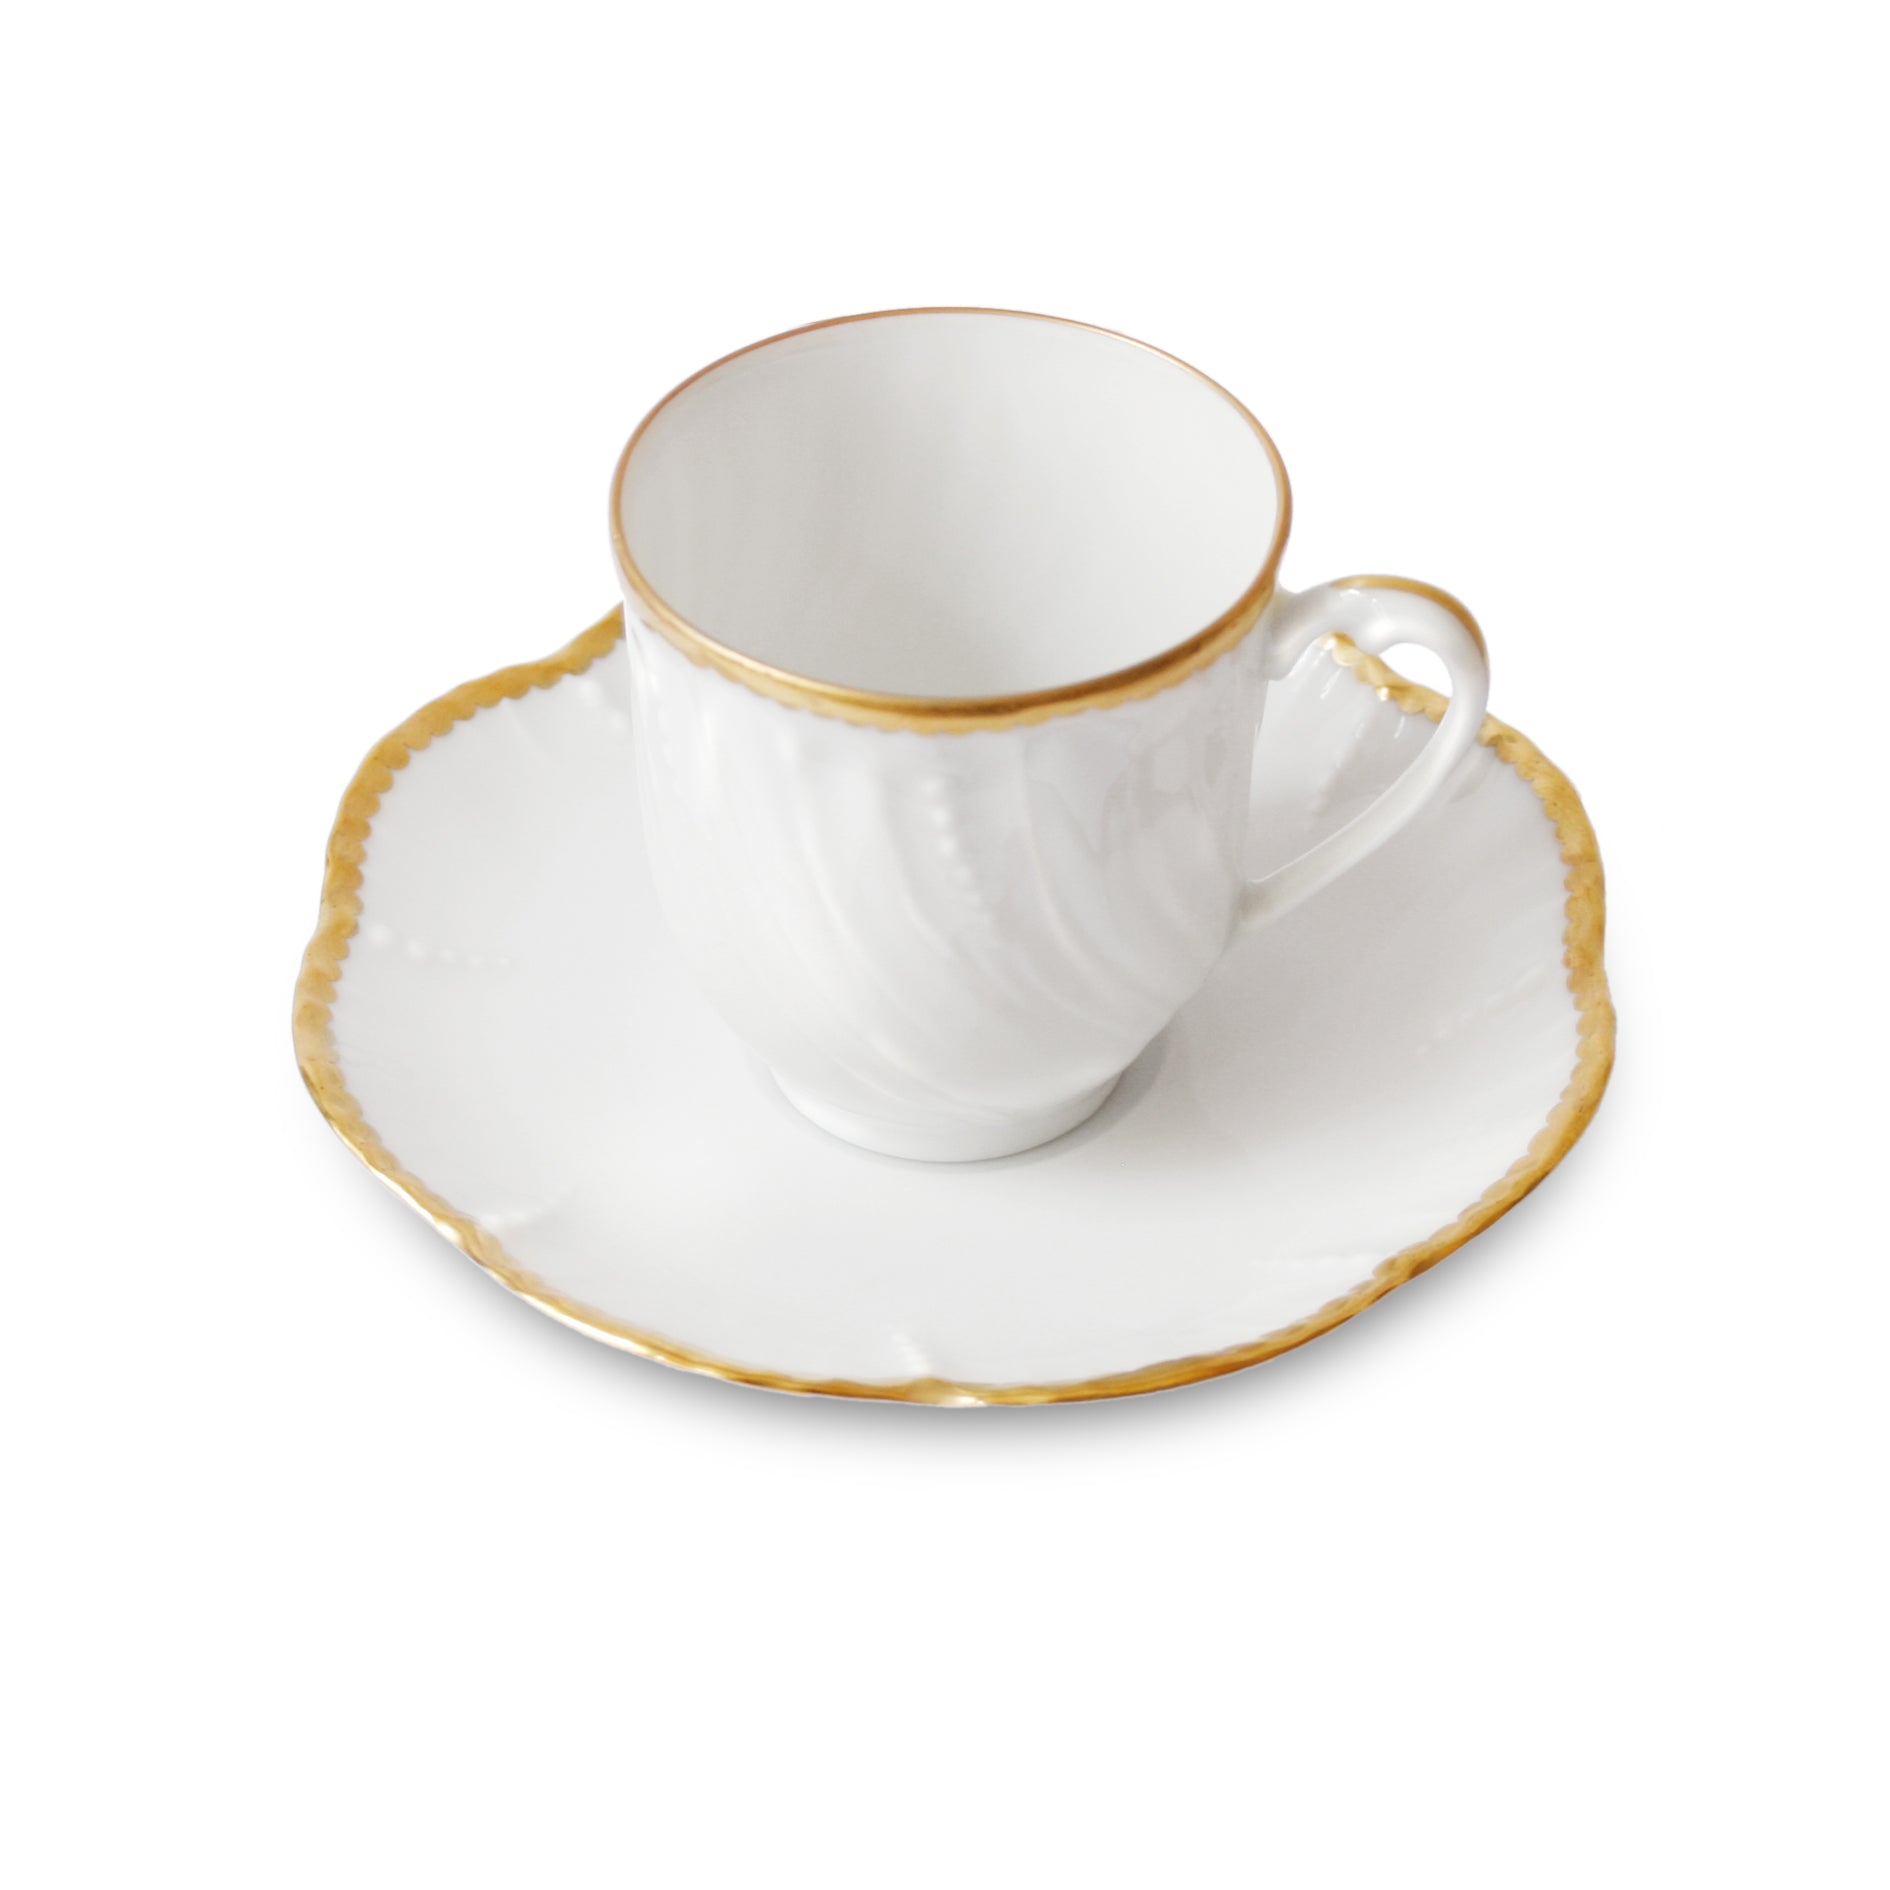 Simple dentelle - Coffee cup and saucer
